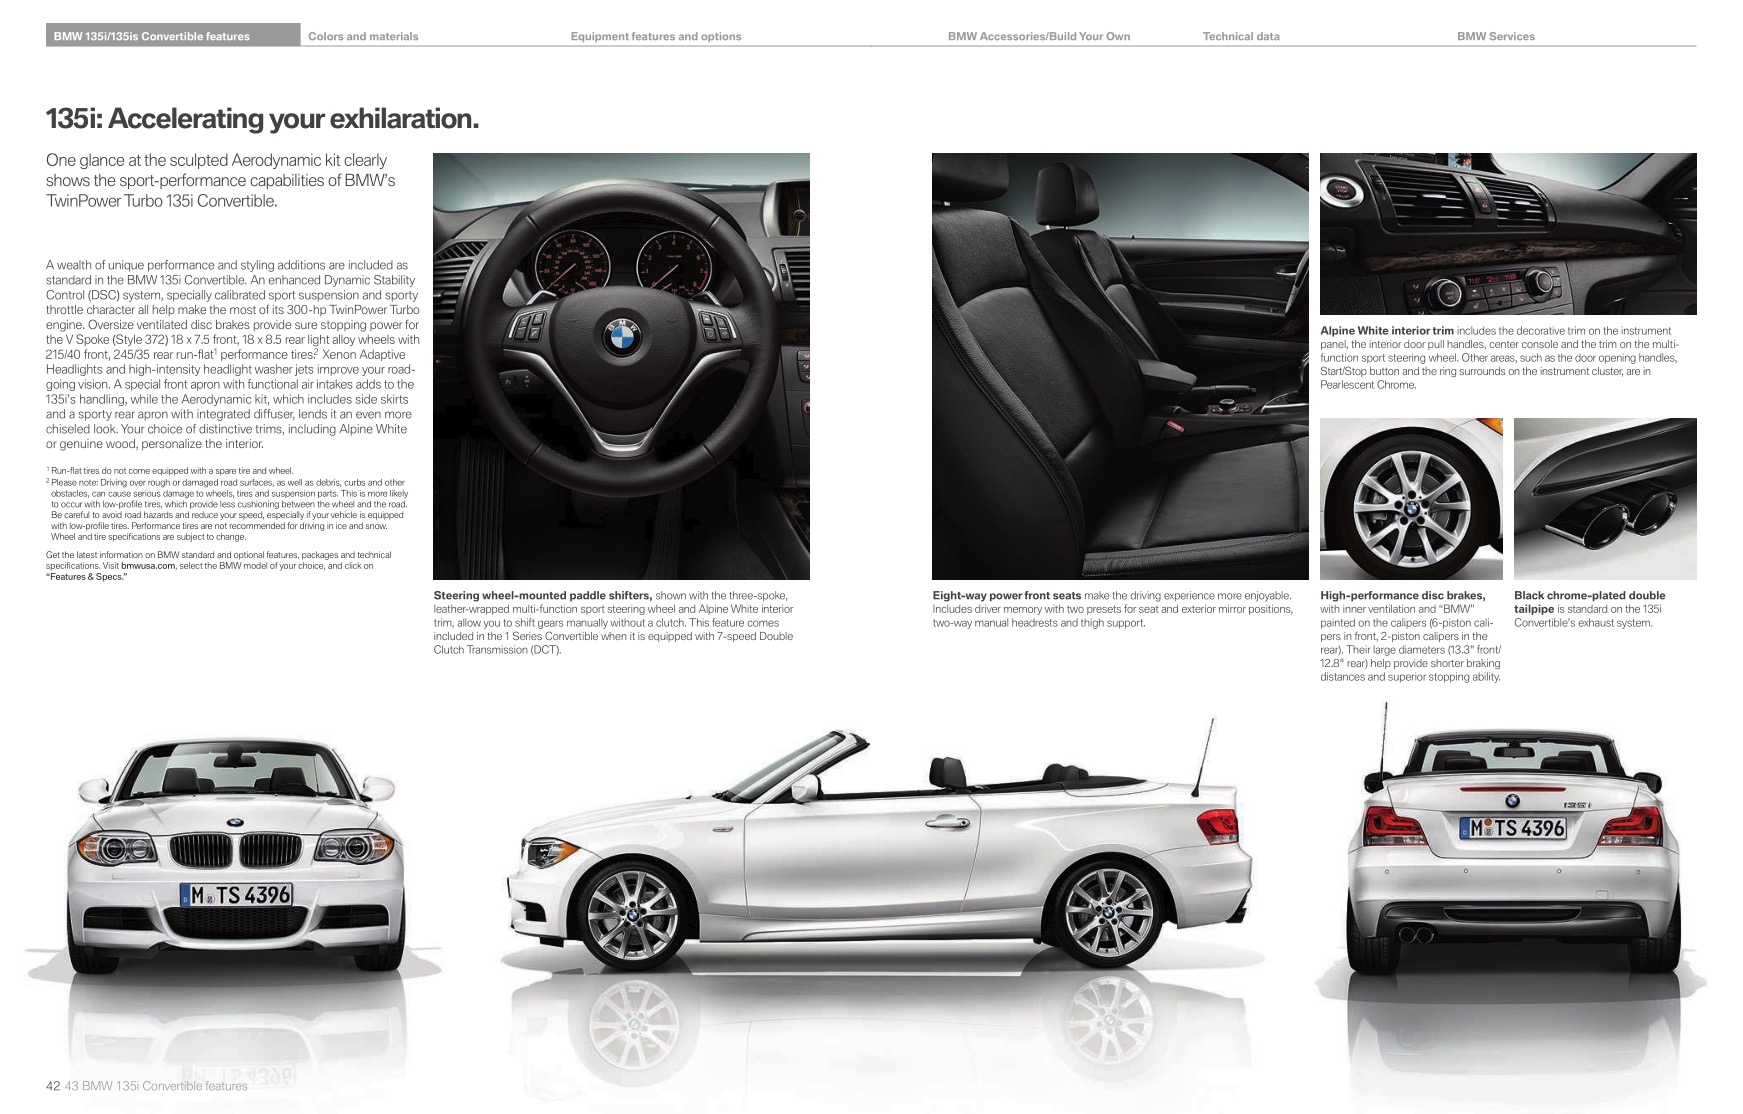 2013 BMW 1-Series Convertible Brochure Page 1